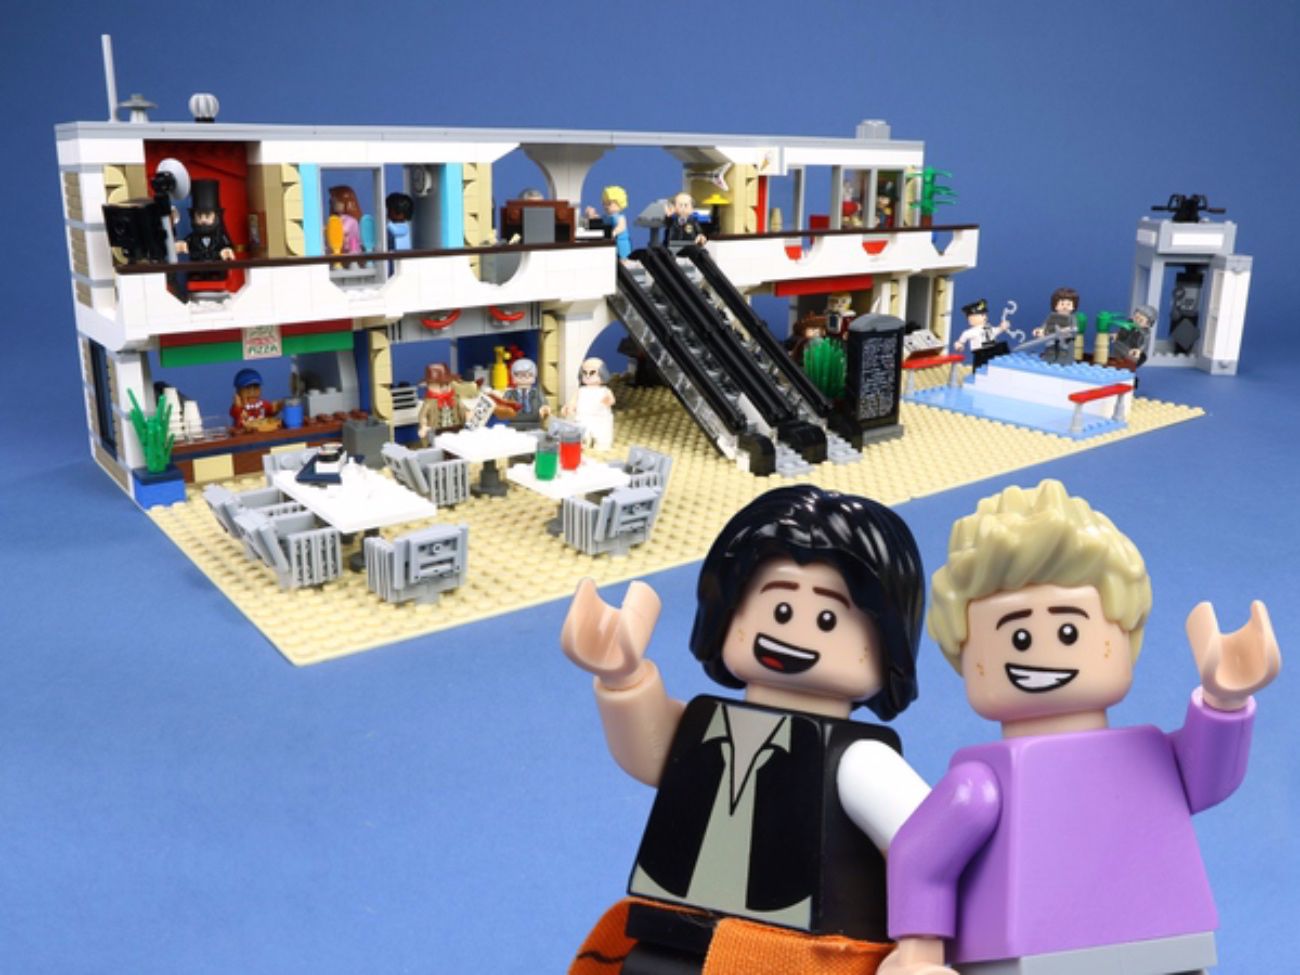 Bill and Ted Lego Set #11